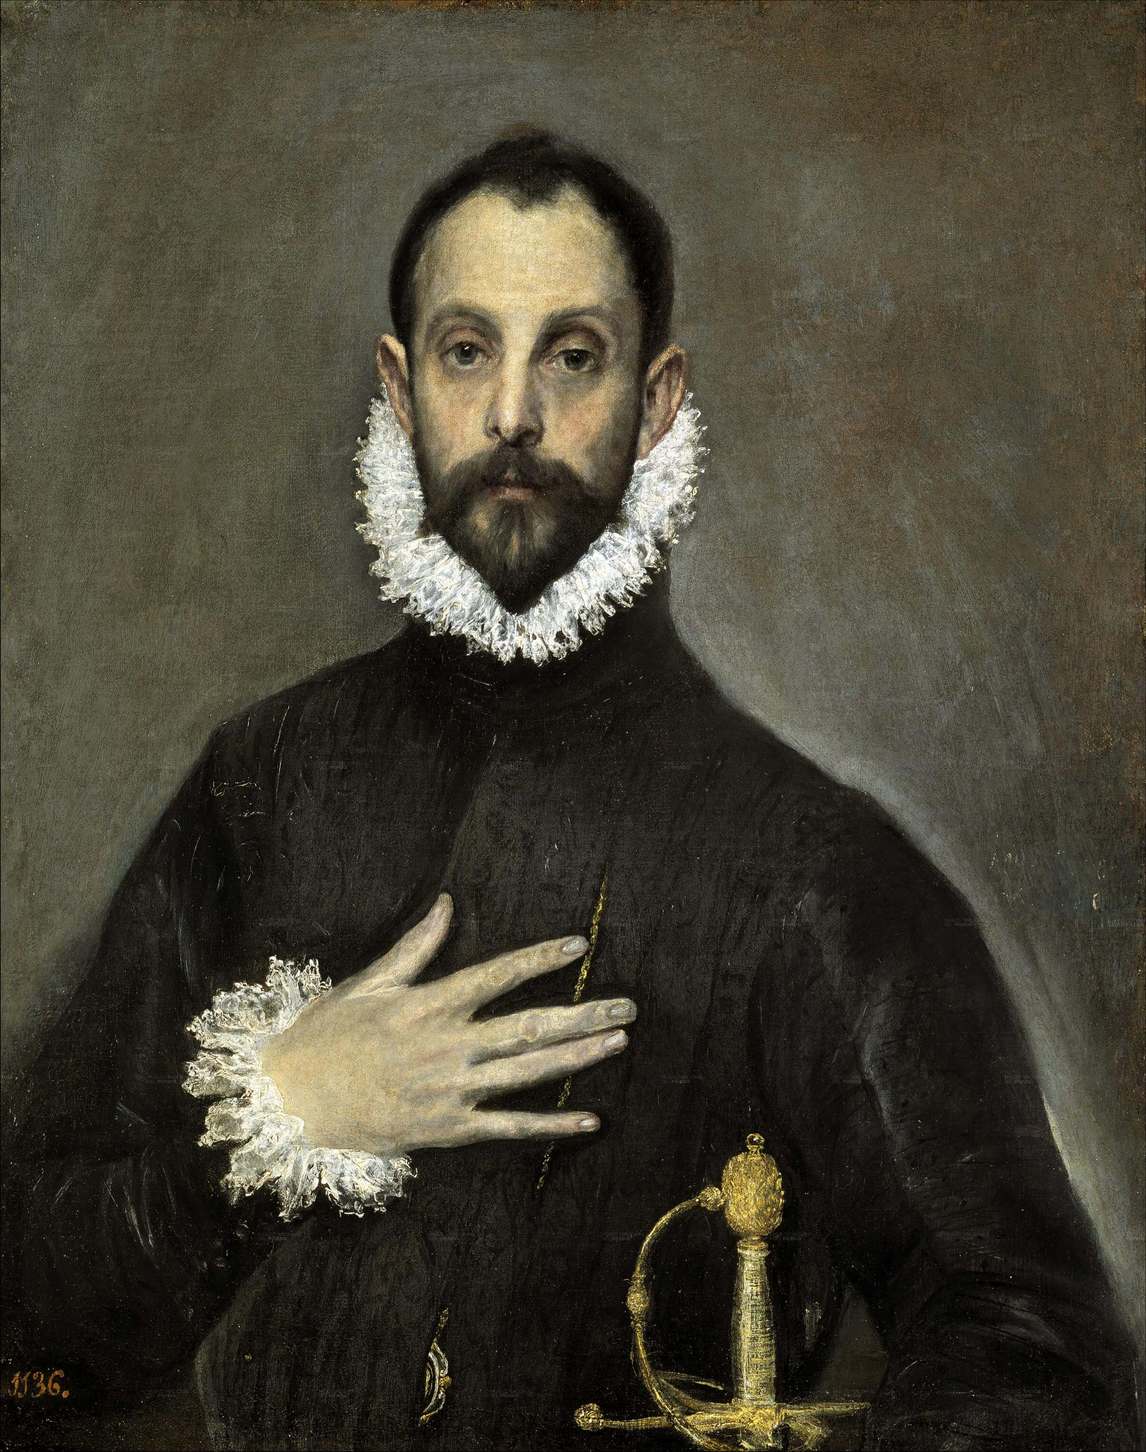 Art Canada Institute, El Greco, The Nobleman with his Hand on his Chest, c. 1580